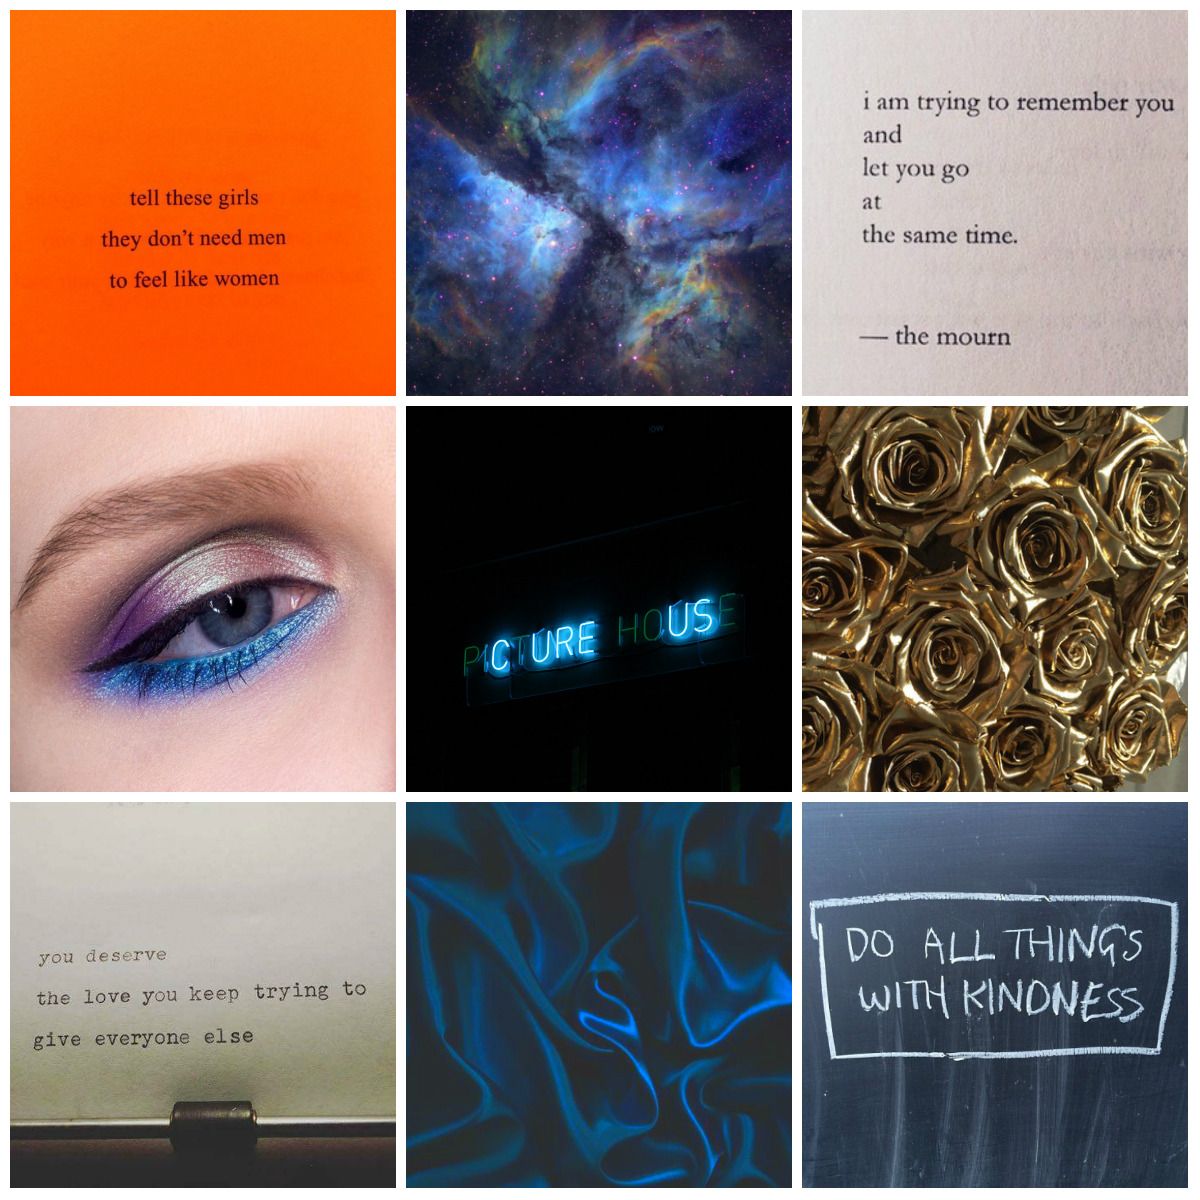 A collage of nine photos, including a galaxy background, a quote from The Mourn, a gold rose illustration, and a blue eye with a galaxy eyeliner. - Star Trek